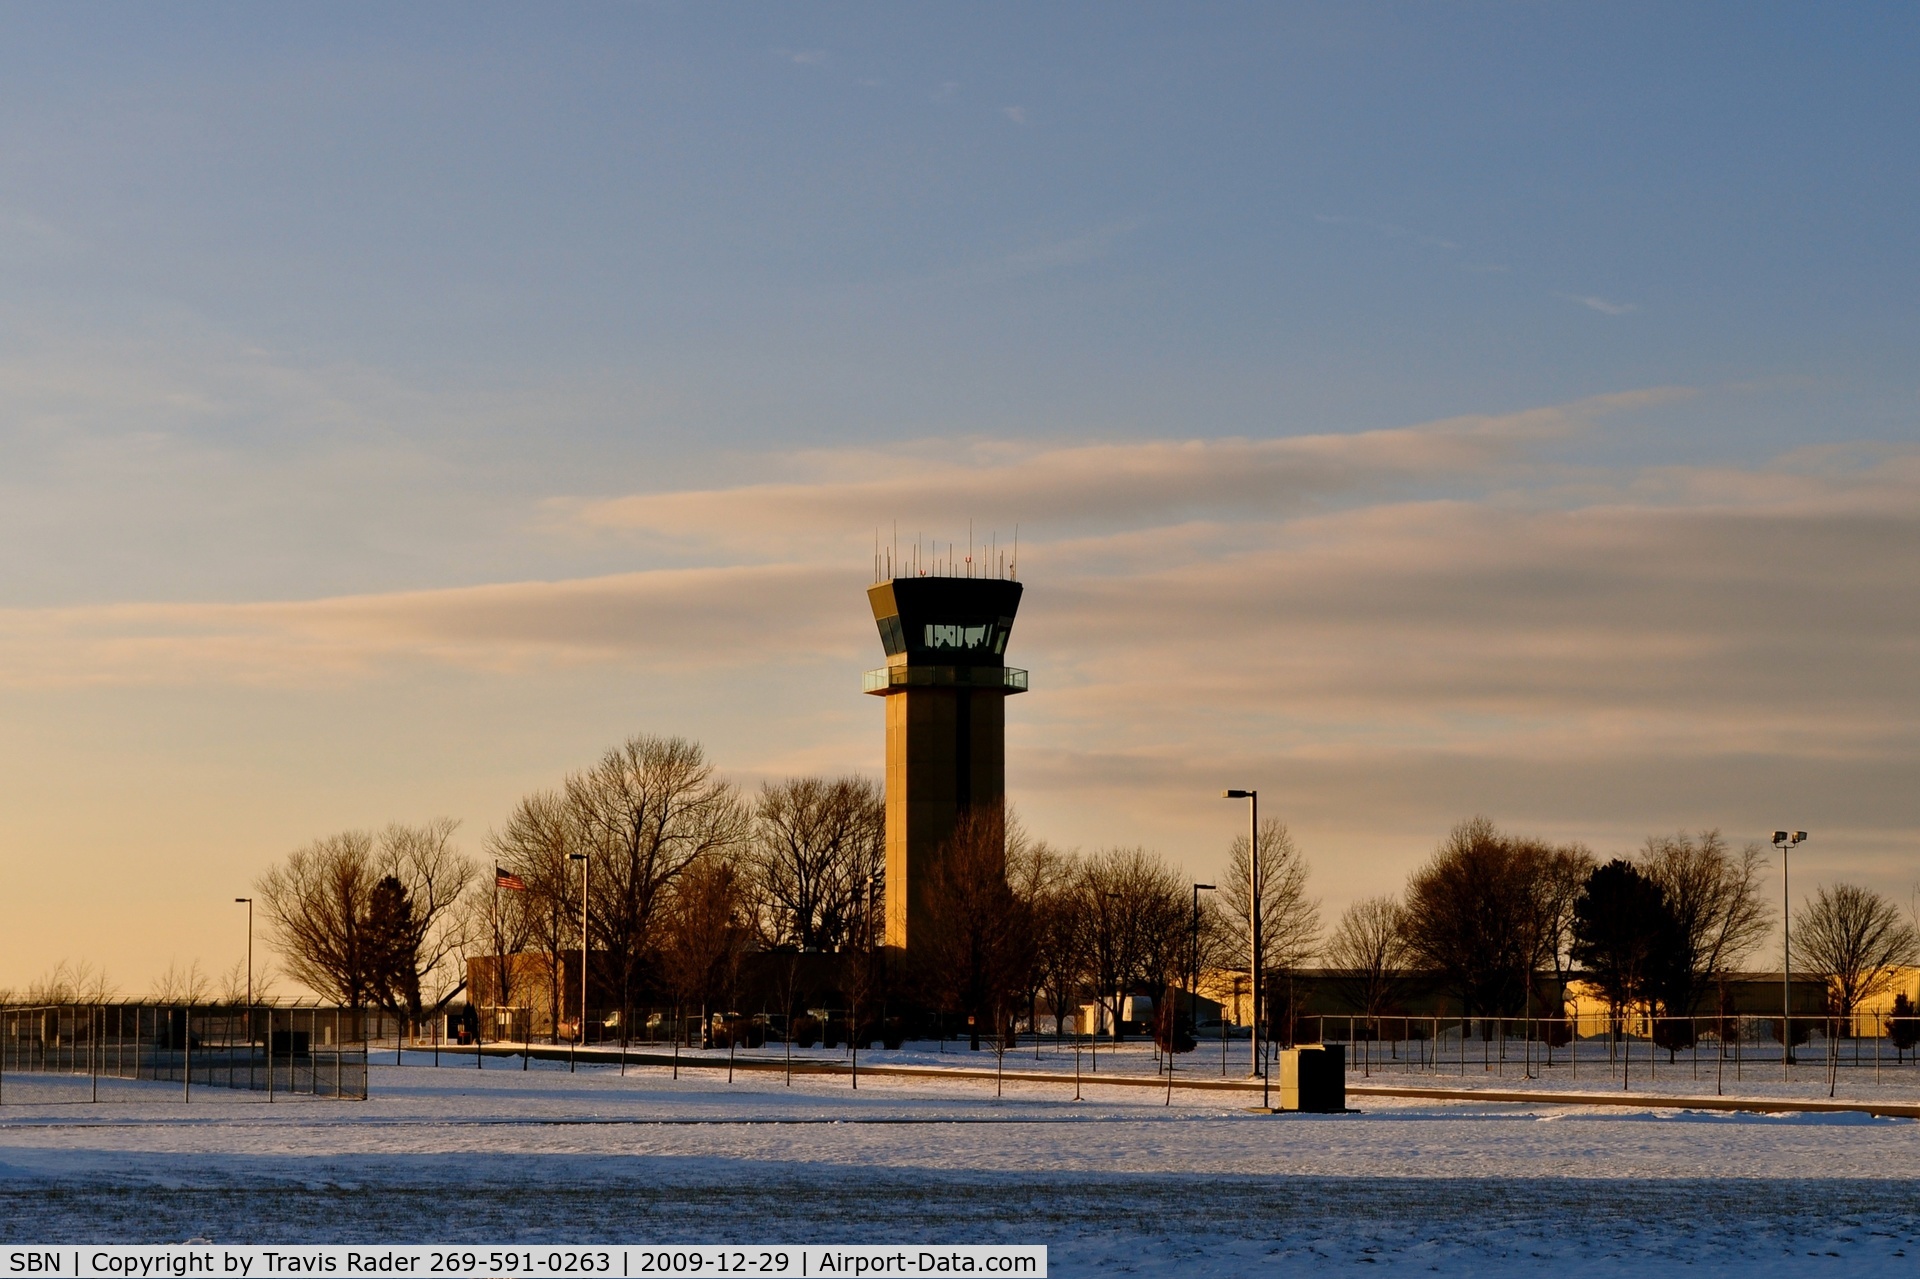 South Bend Airport (SBN) - South Bend Tower at Sunset